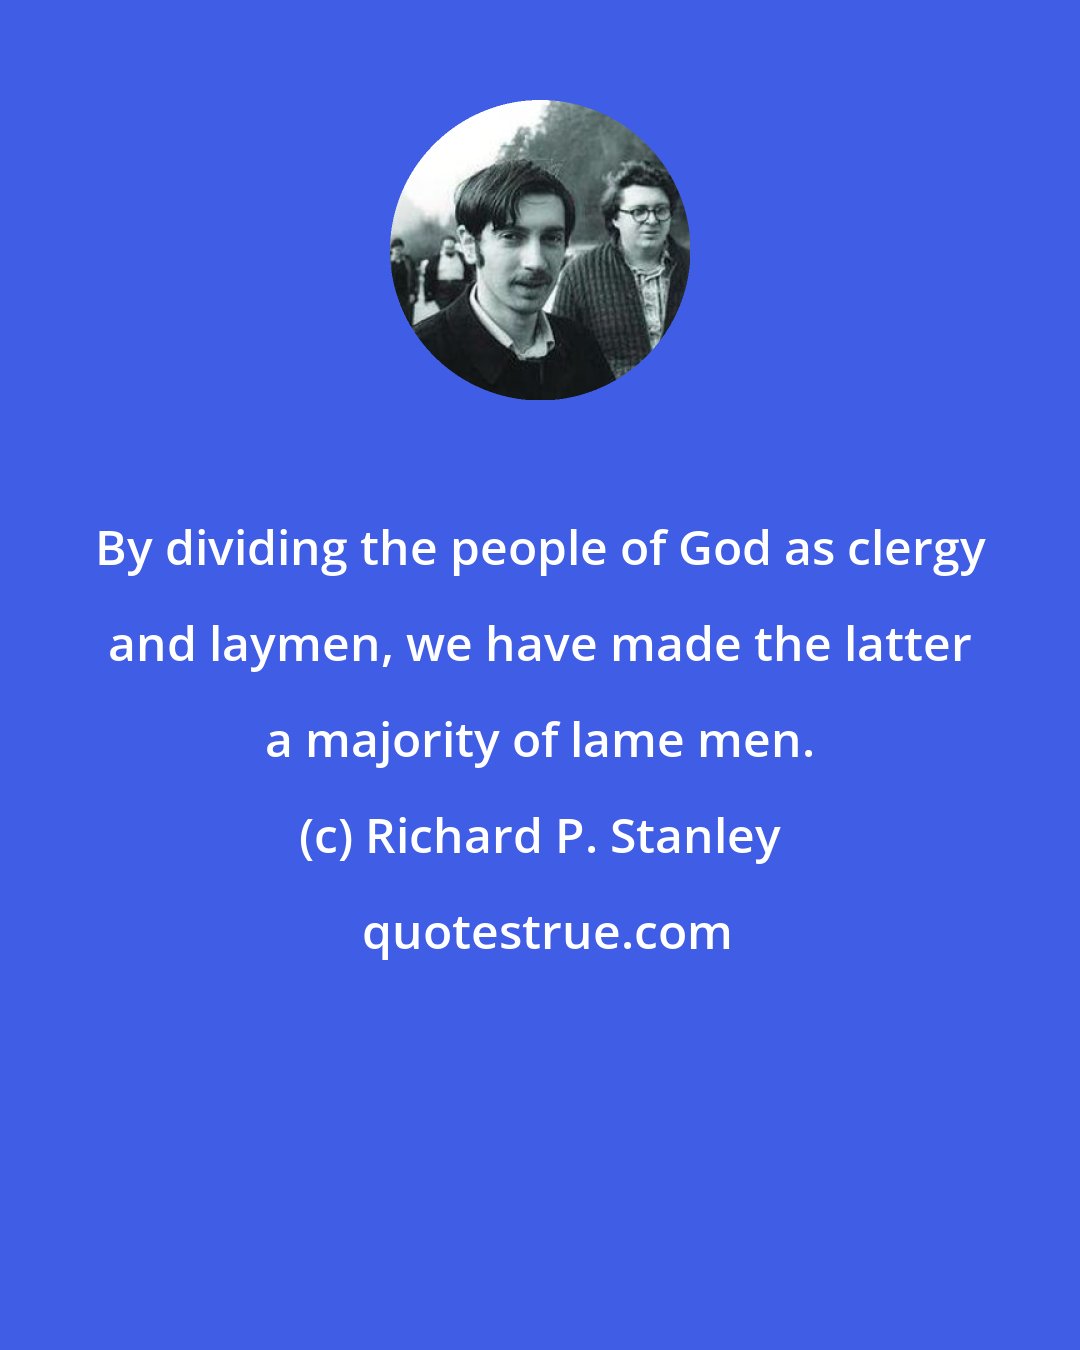 Richard P. Stanley: By dividing the people of God as clergy and laymen, we have made the latter a majority of lame men.